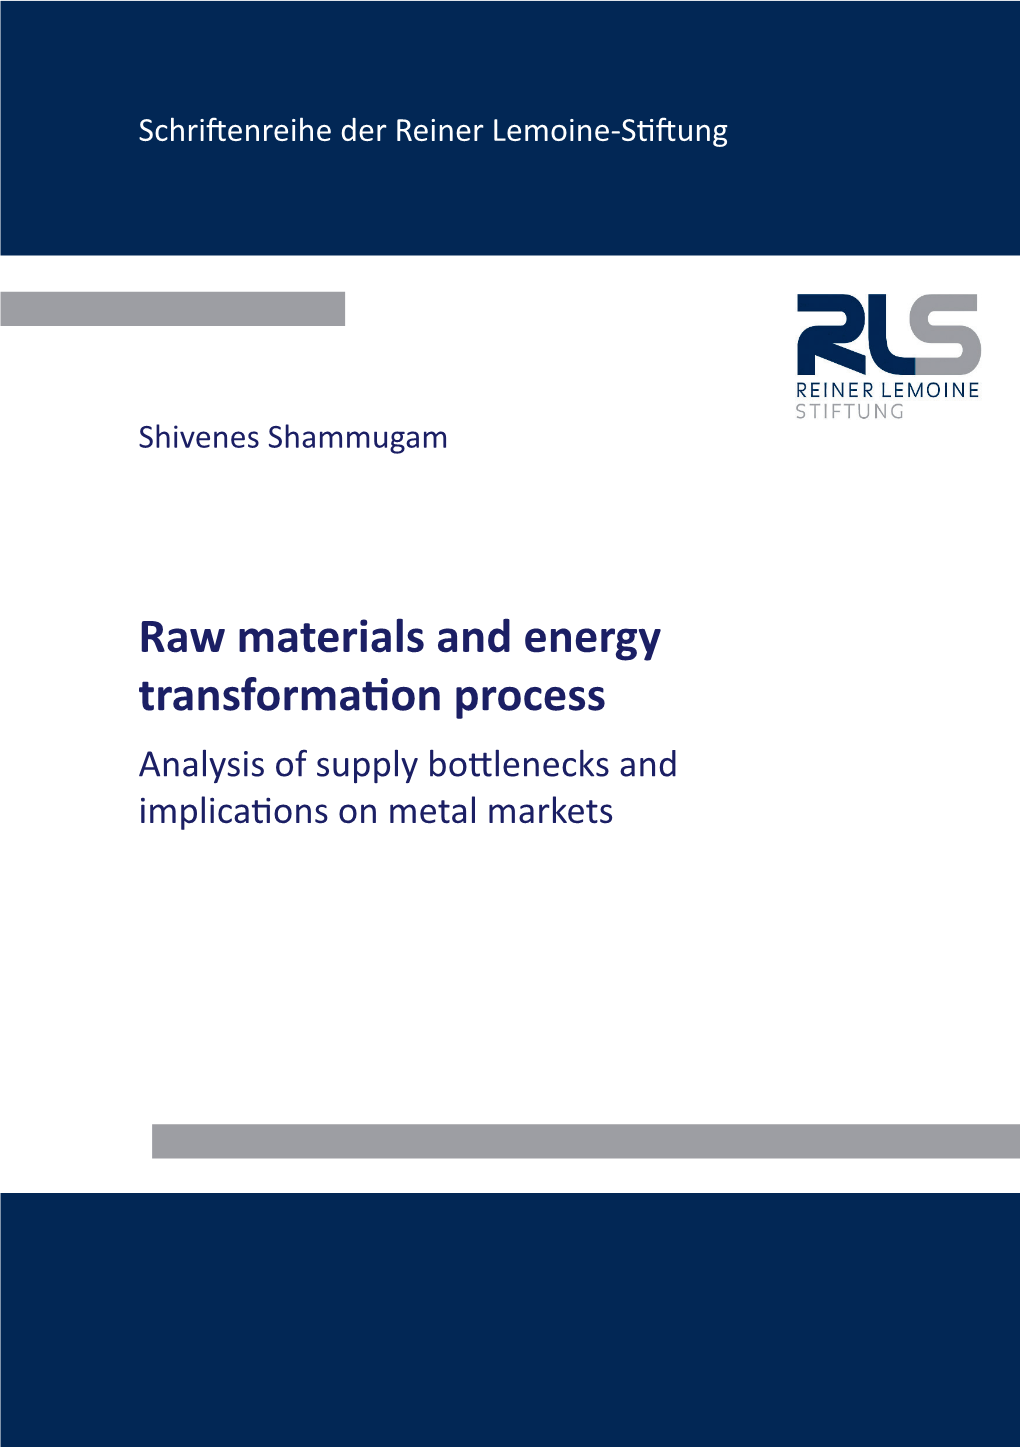 Raw Materials and Energy Transformation Process - Analysis of Supply Bottlenecks and Implications on Metal Markets